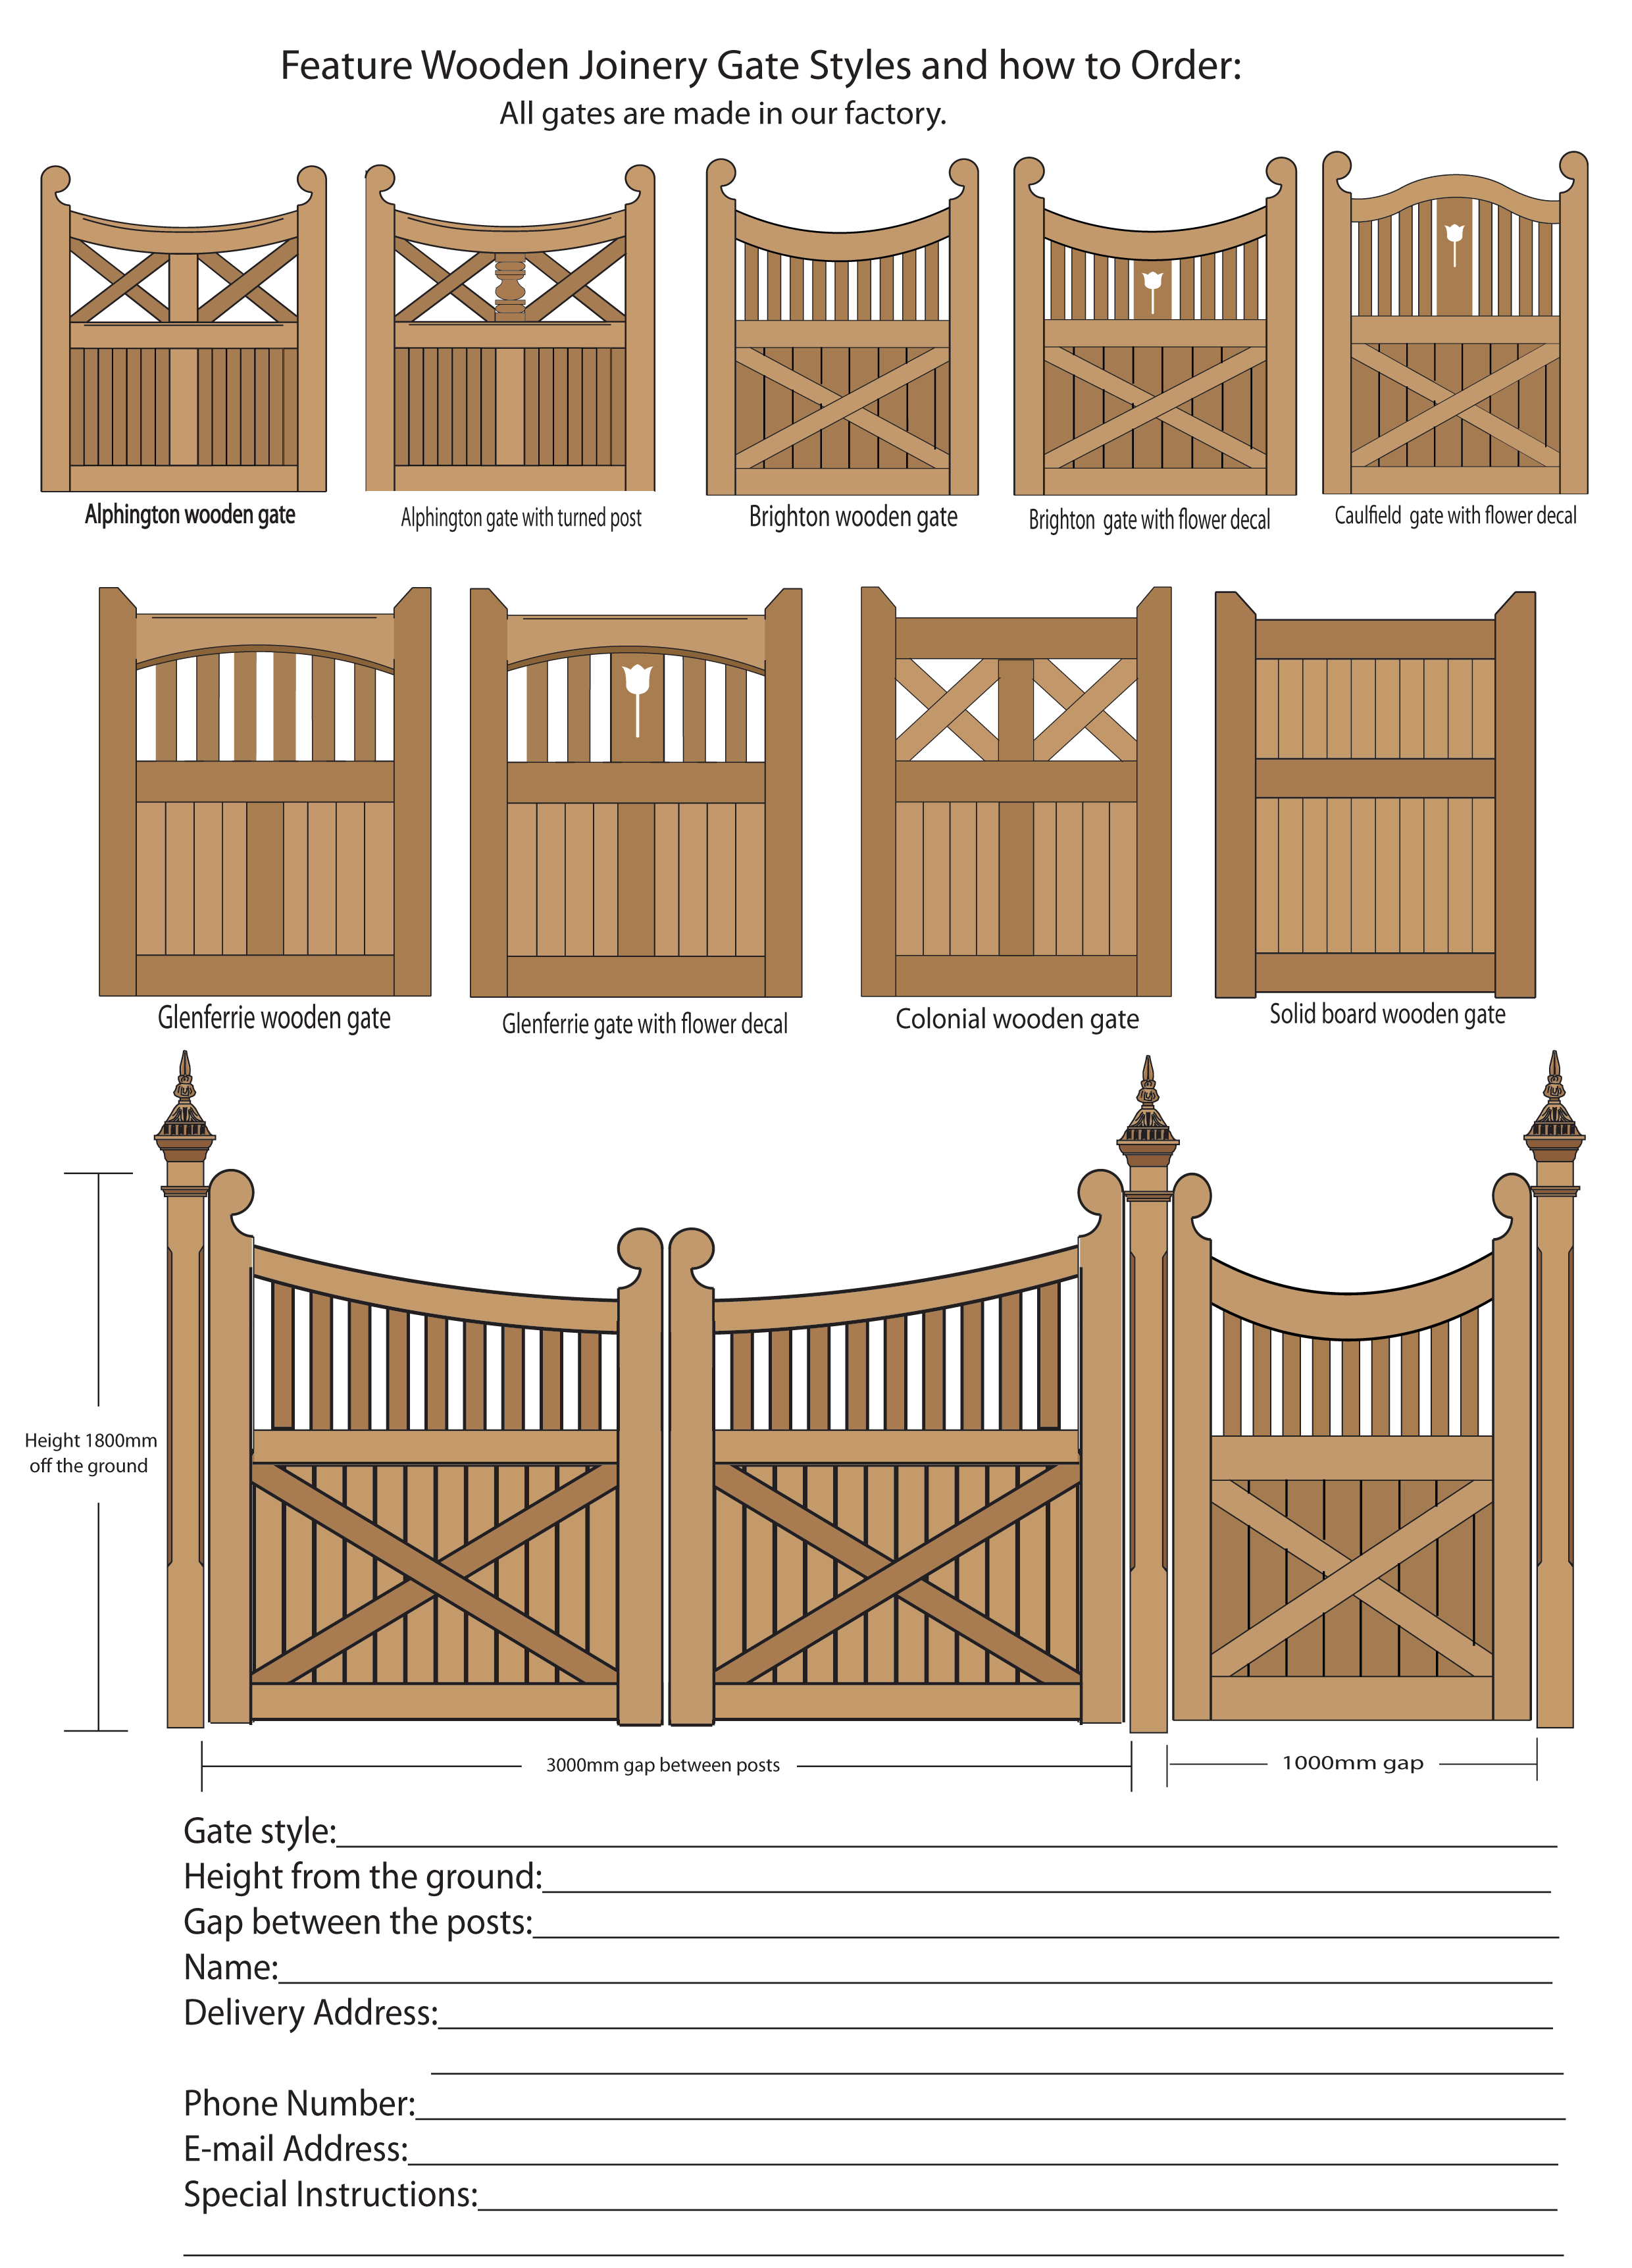 Wooden Gates and Timber gate design.